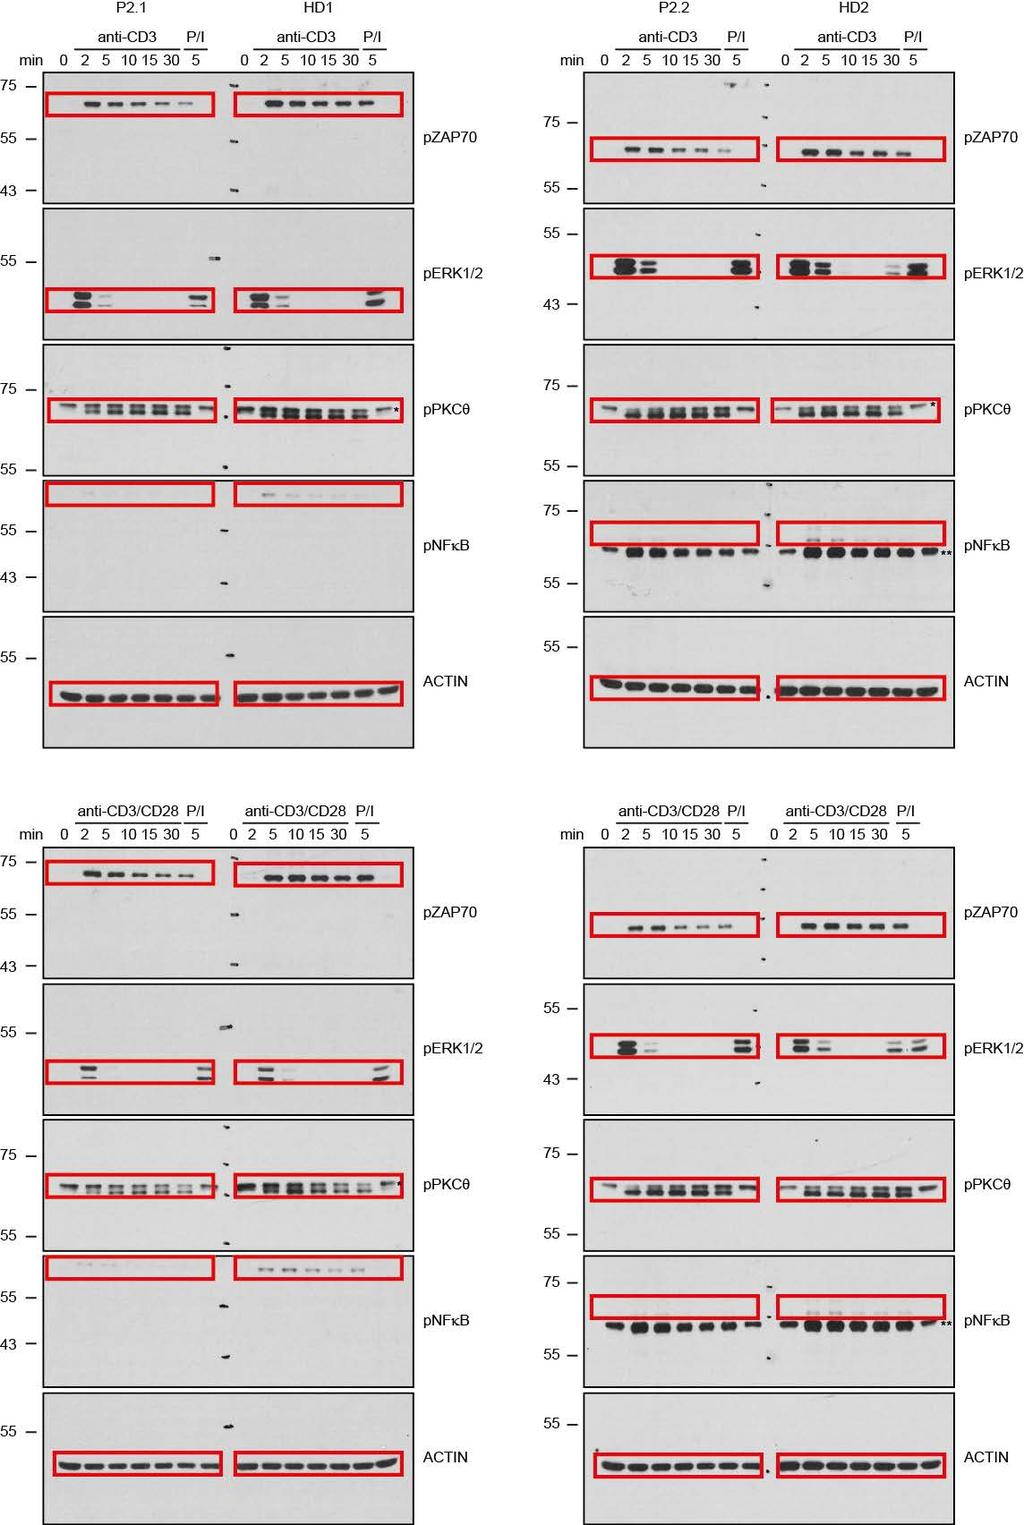 Supplementary Figure 9. Uncropped original immunoblots shown in Figure 7. The cropped areas are marked in red.